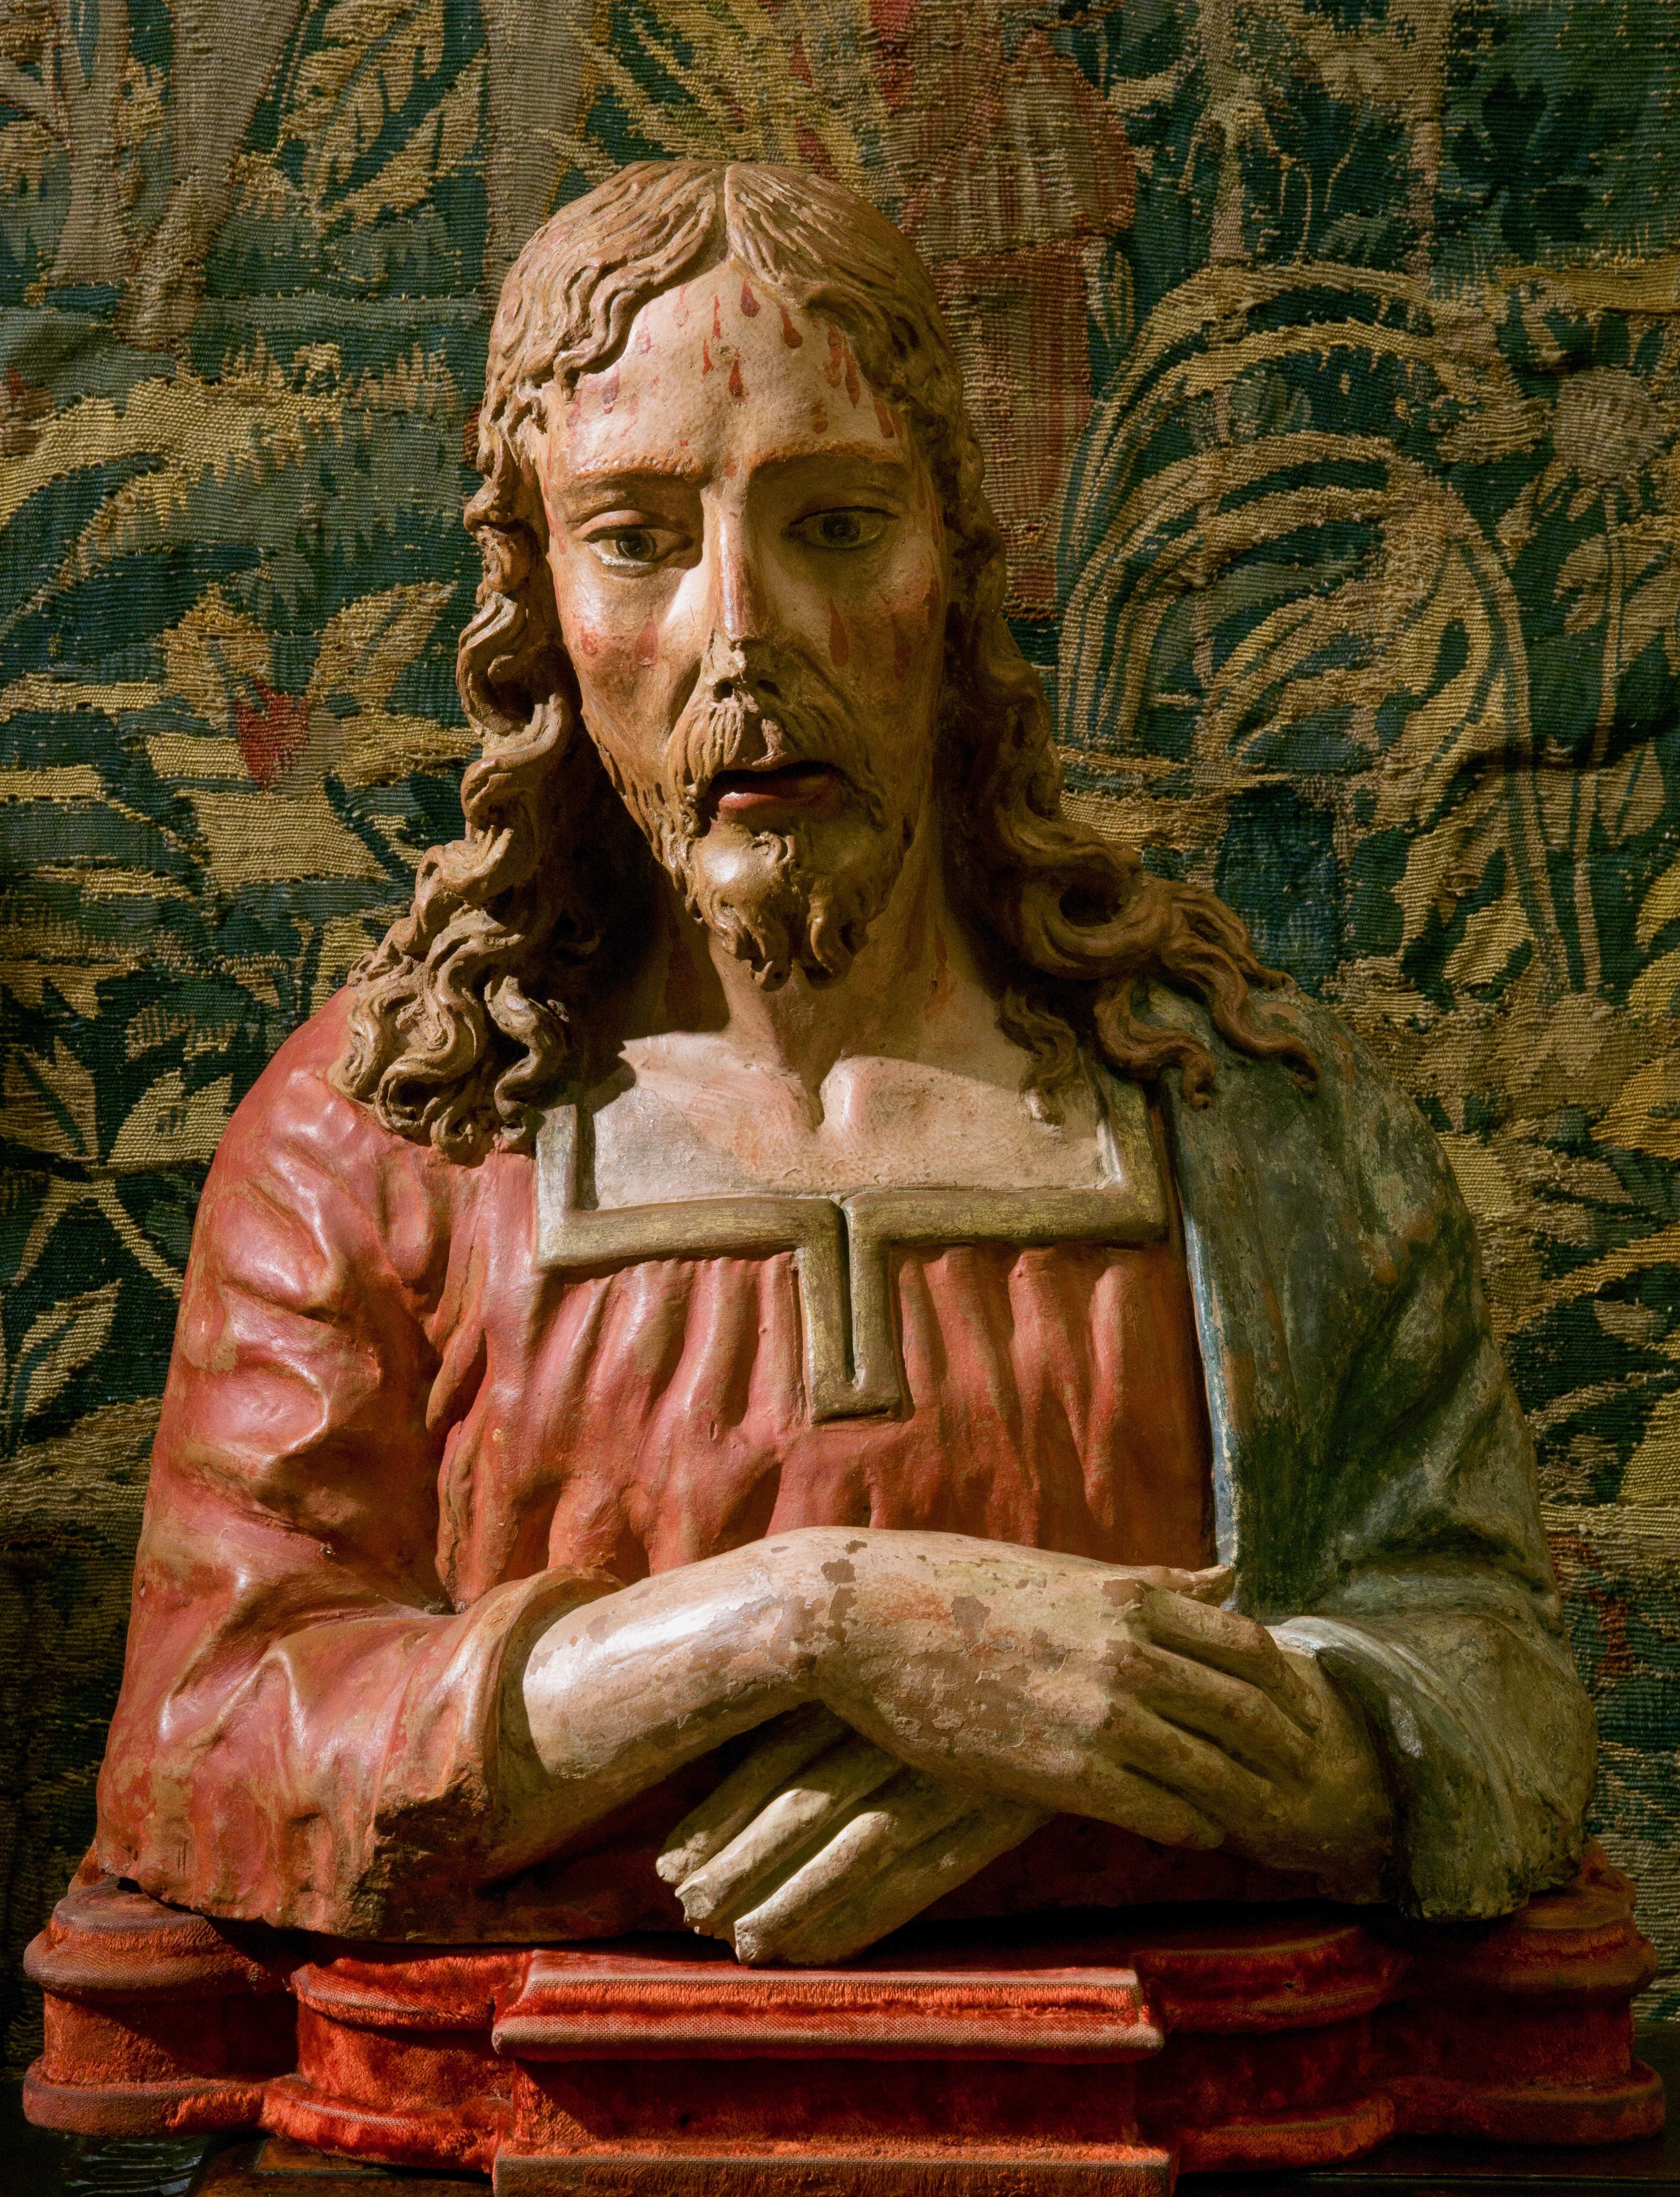 A terracotta bust of Christ as The Redeemer
Tuscany or Emilia Romagna, late 15th century
 Measures: 46 x 43 x 21 cm
 
 This powerful, moving bust of Christ as the Redemeer is characteristic of a type of terracotta statuary that flourished in the